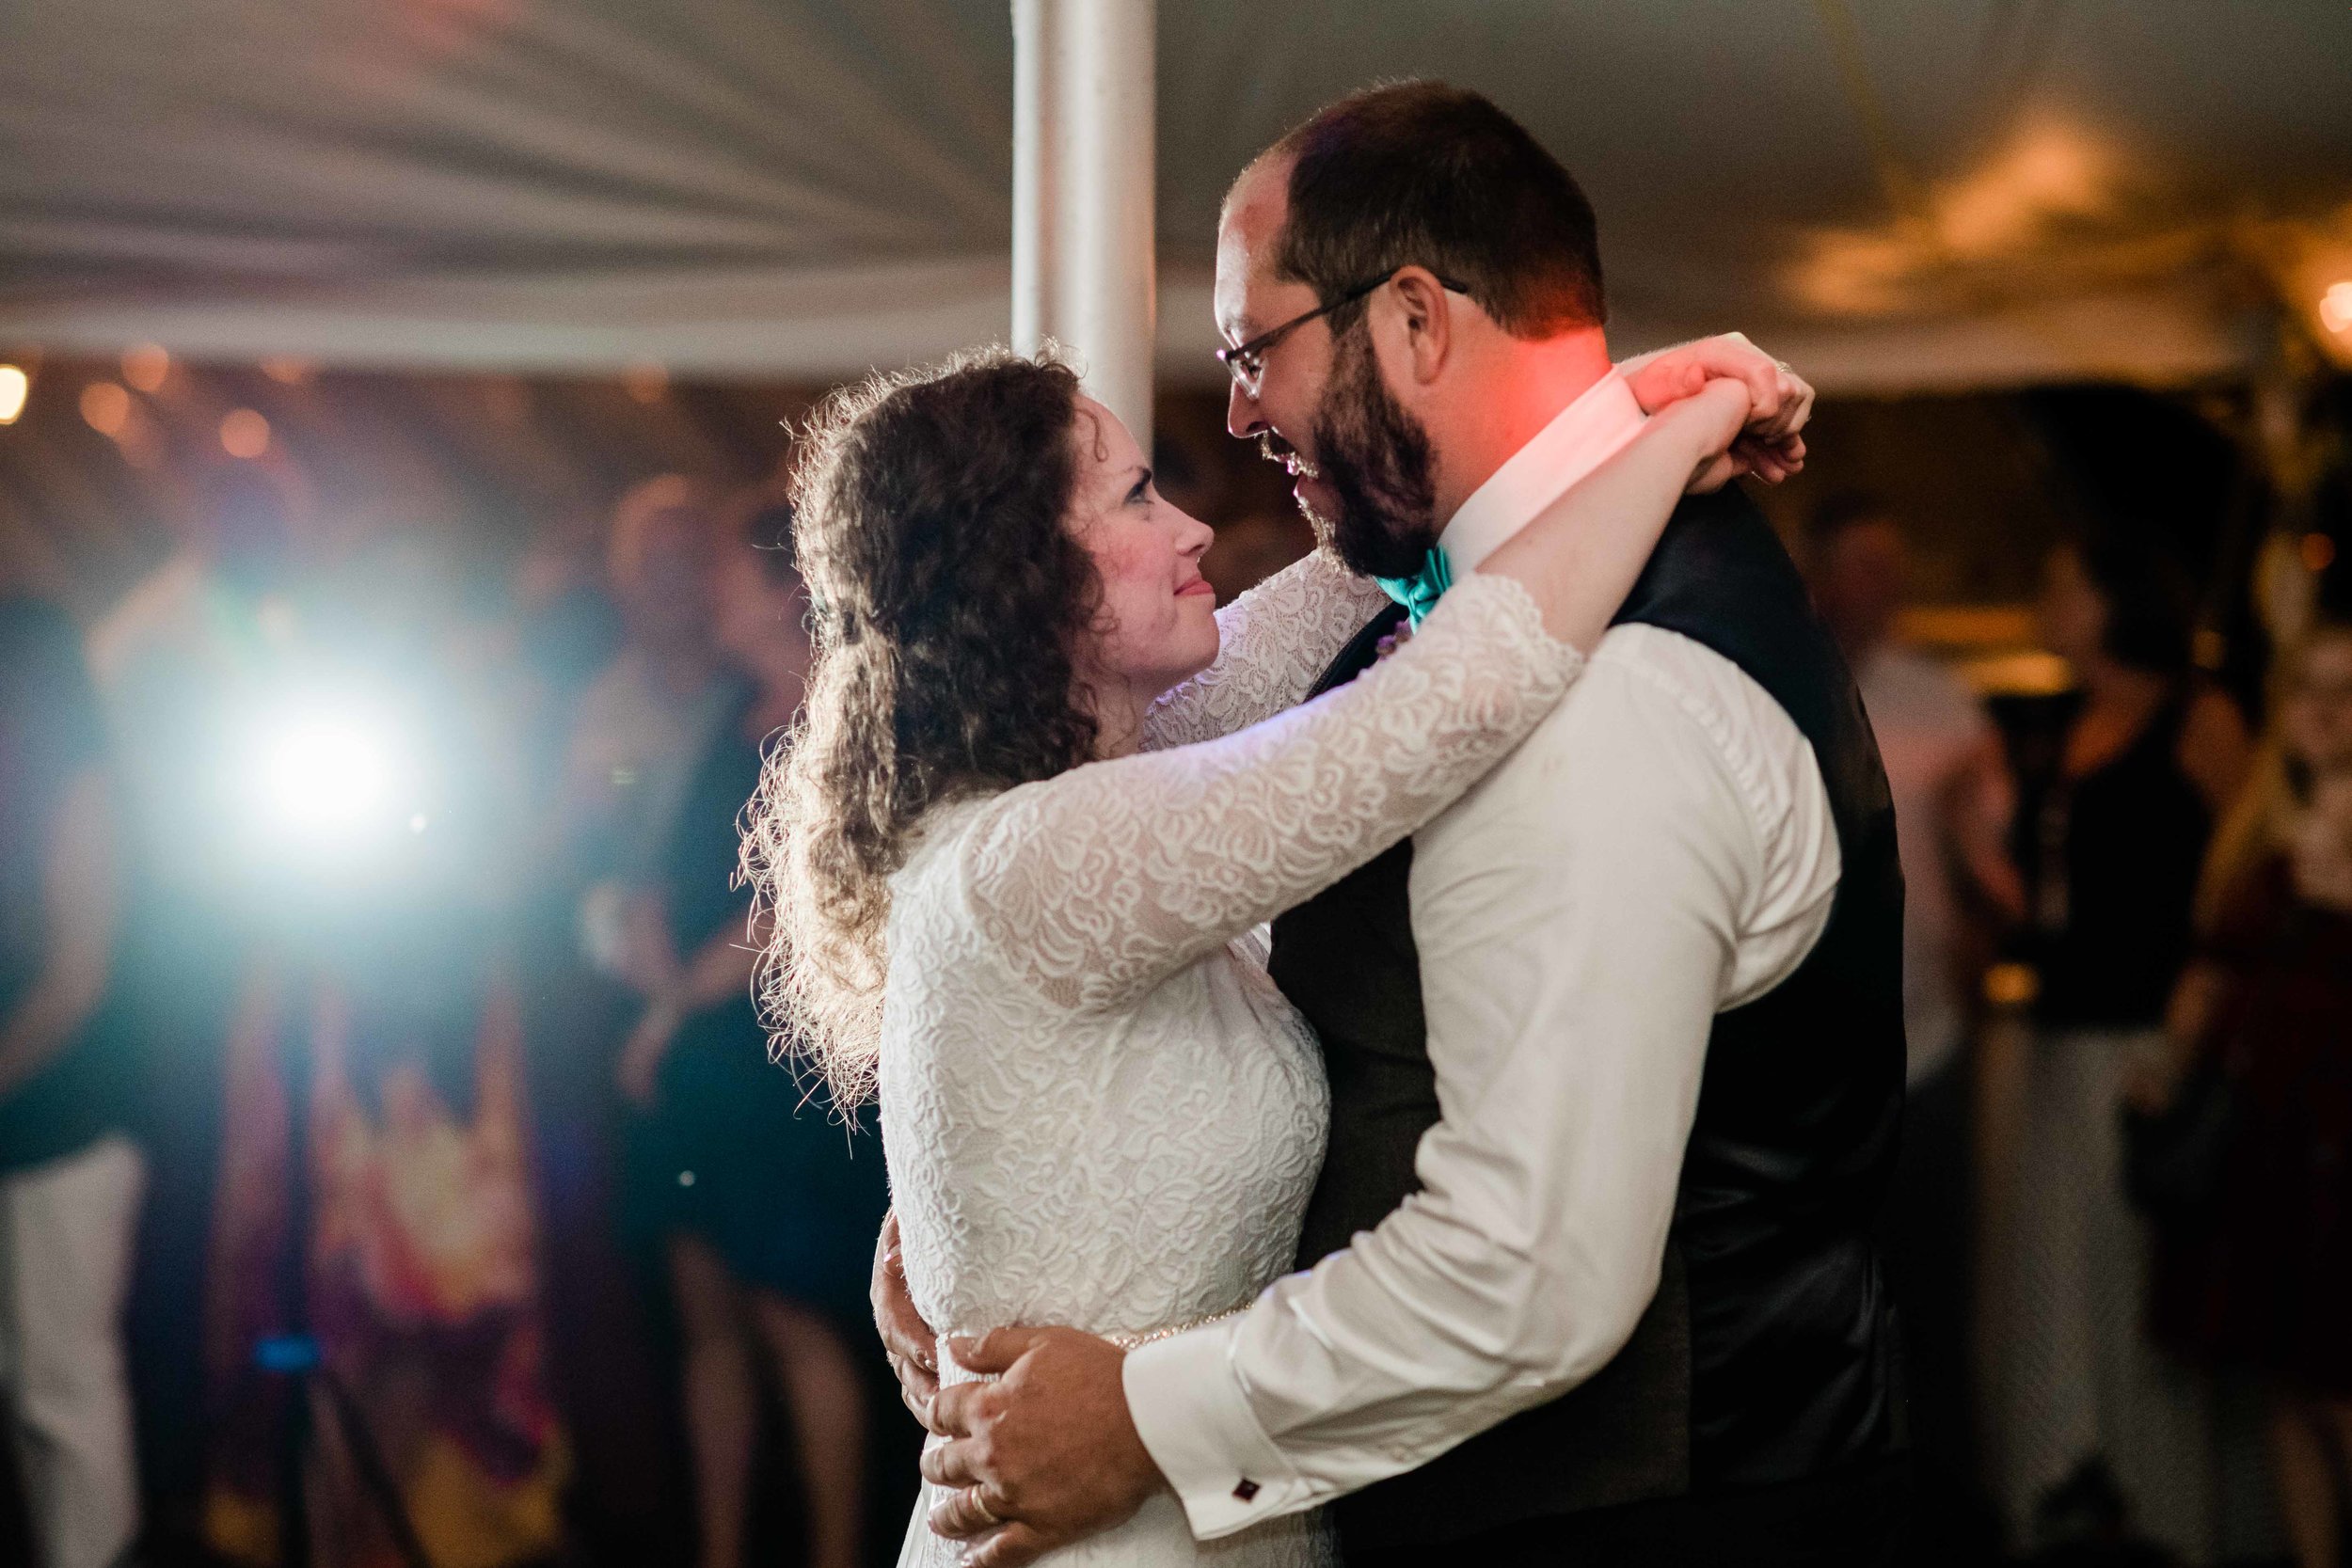 Bride and groom look into each other's eyes during first dance